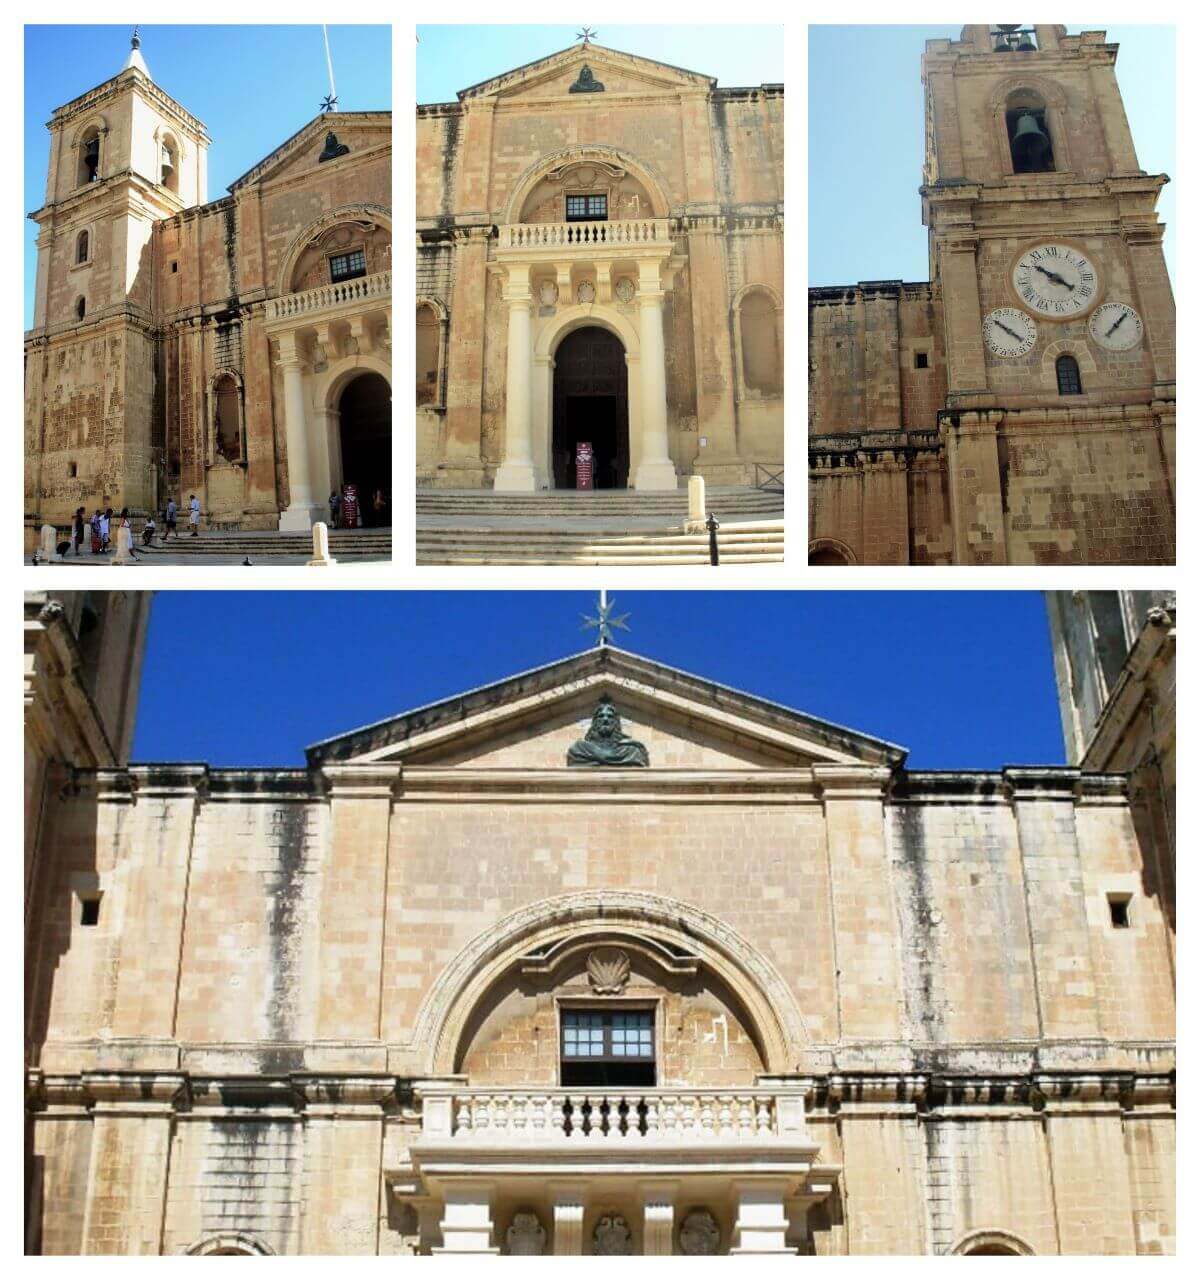 St Johns Co cathedral in Valletta